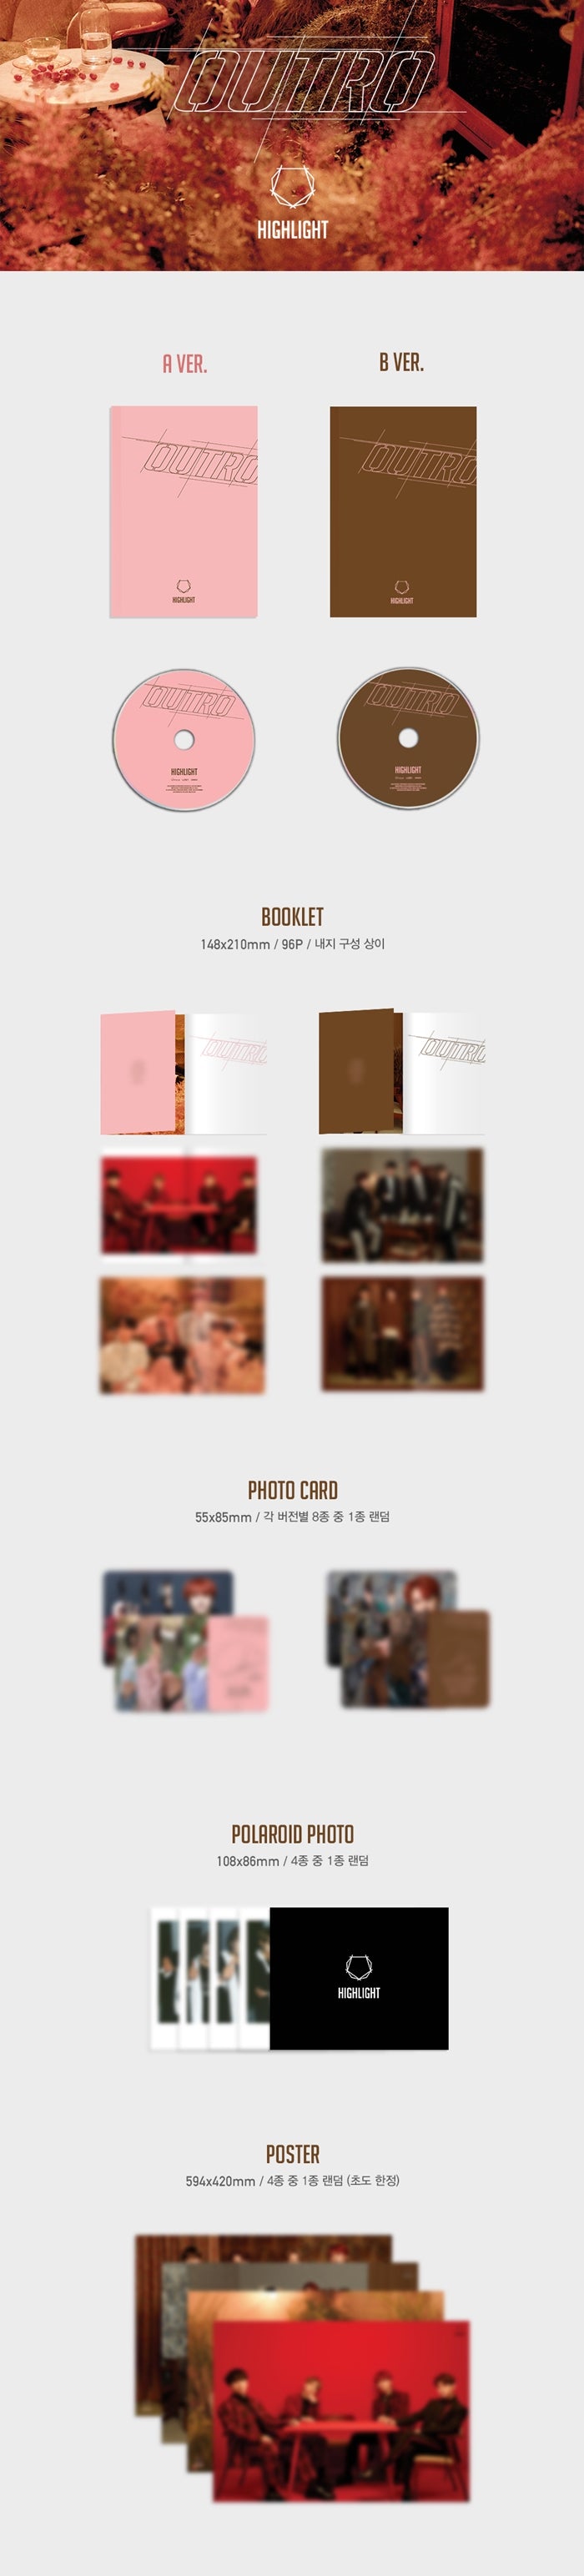 1 CD
1 Booklet (96 pages)
1 Card
1 Polaroid